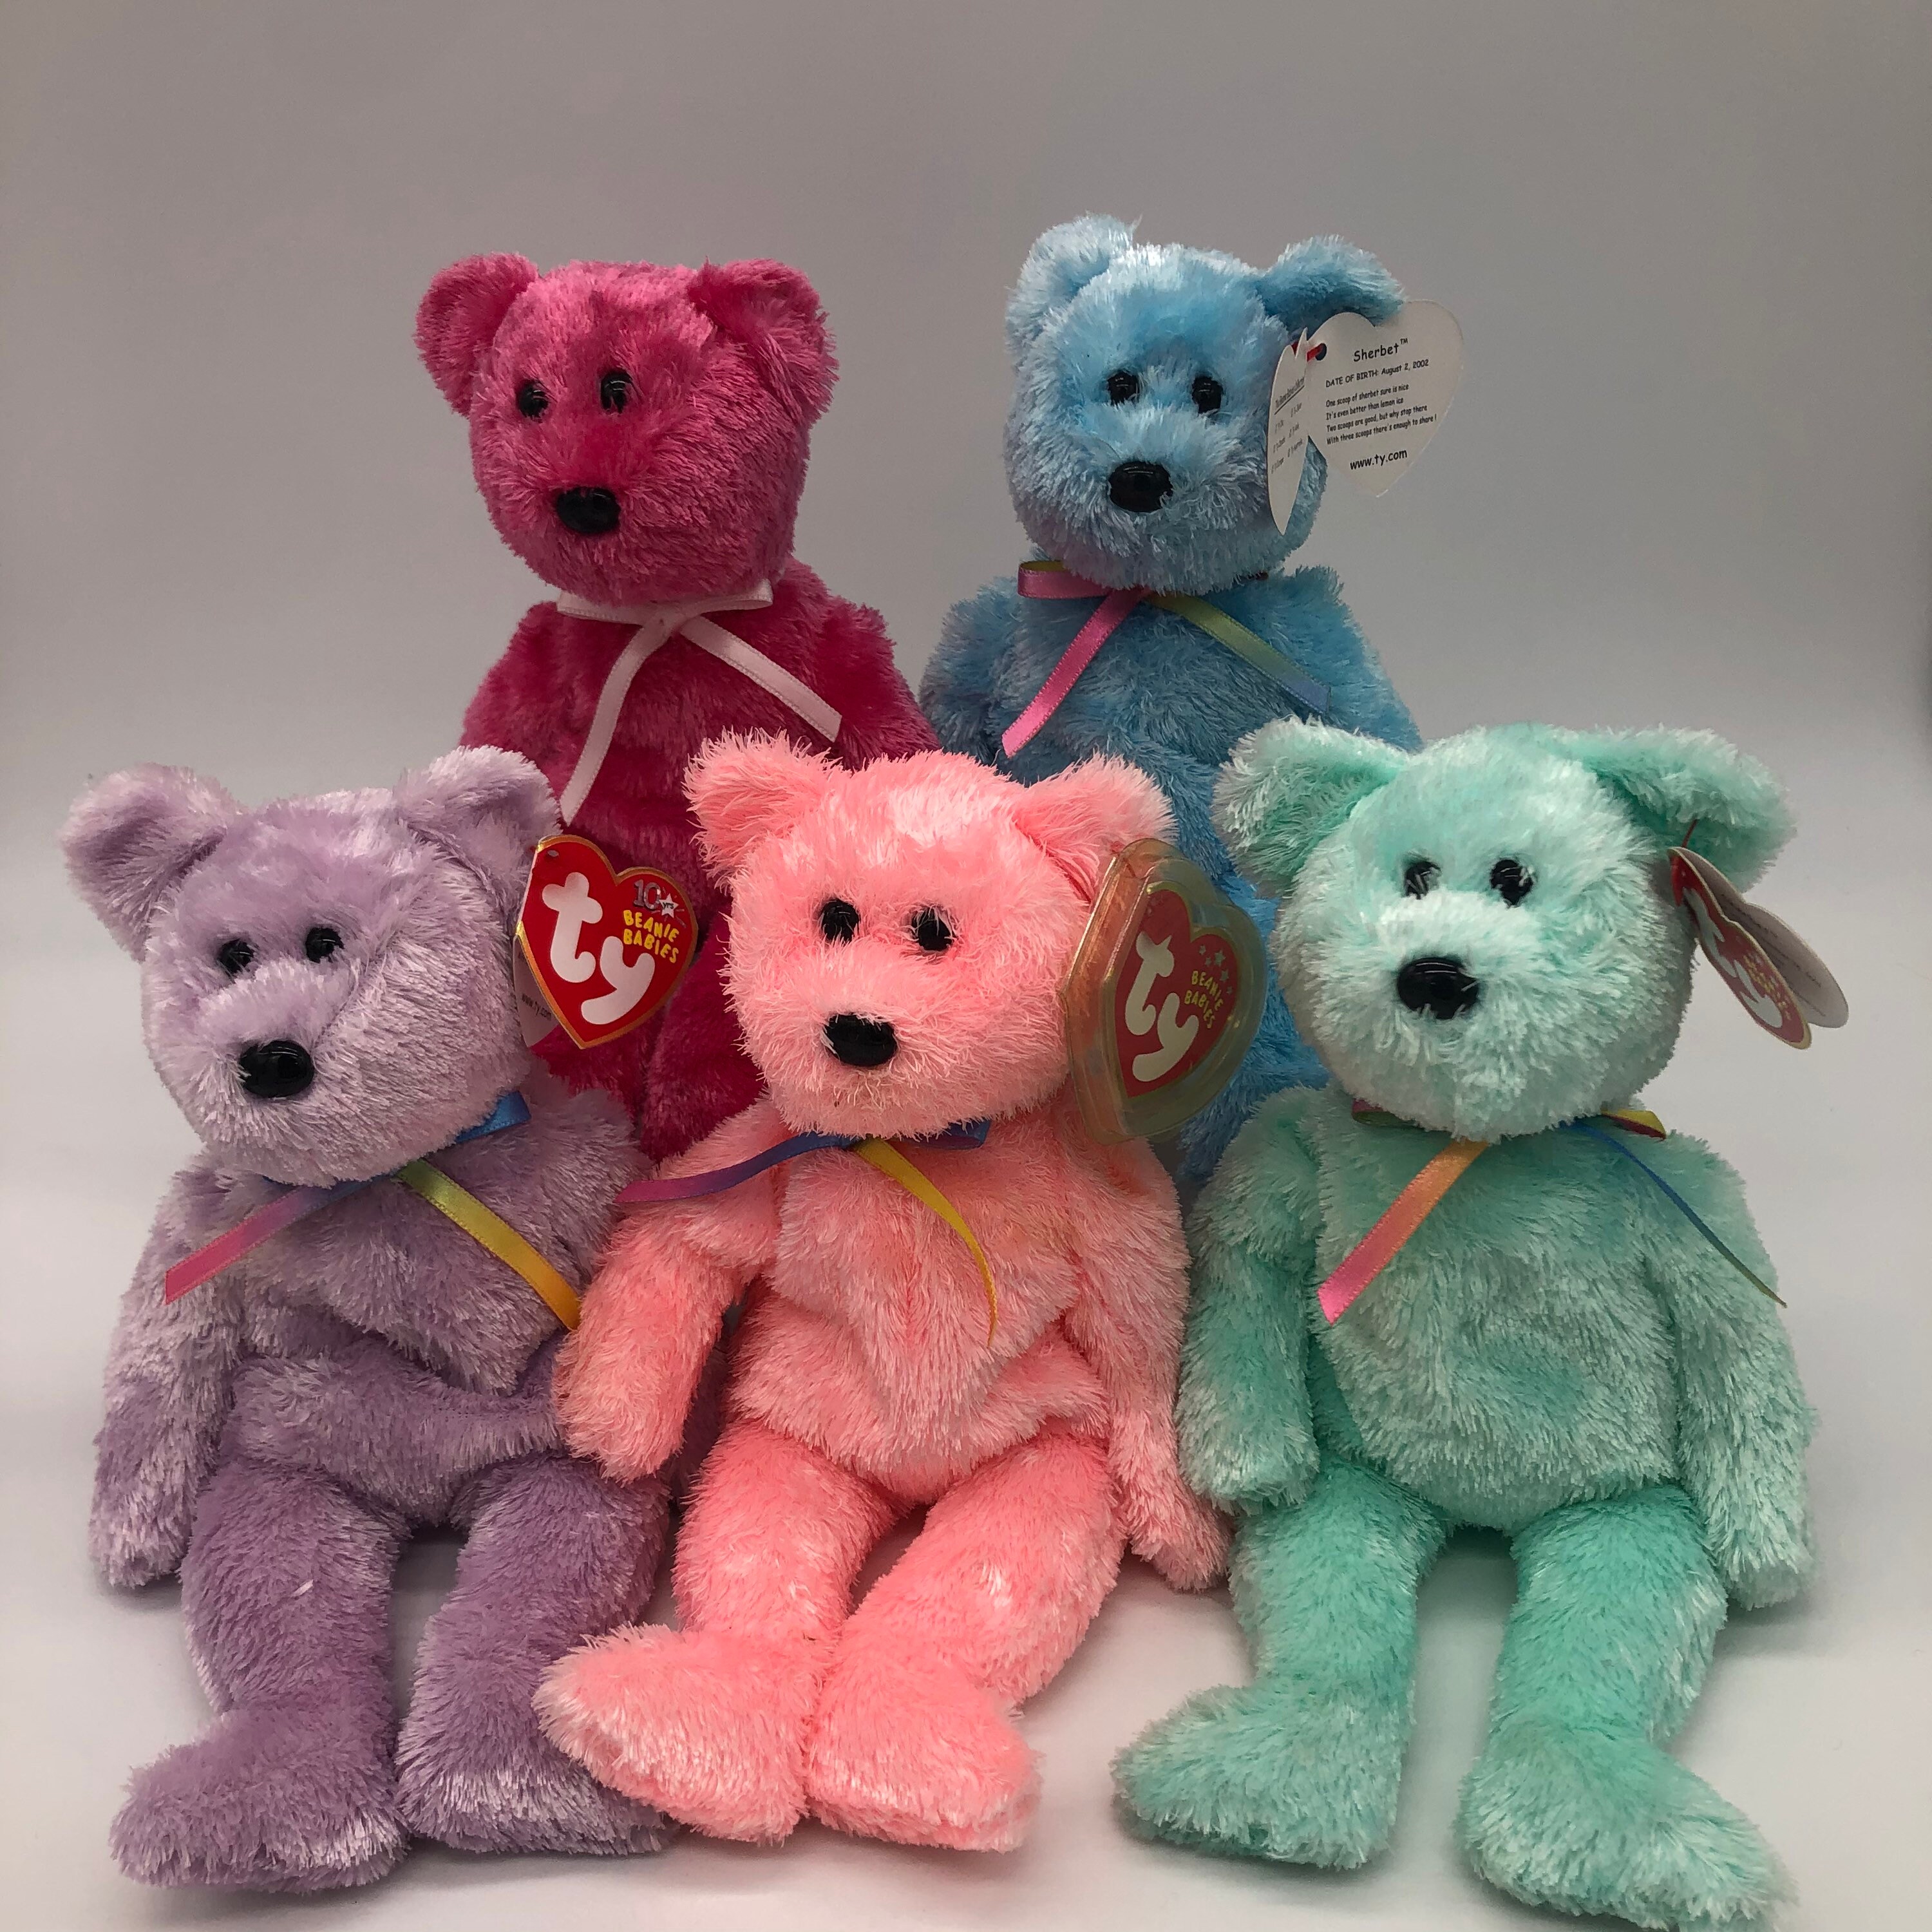 Set of 4 Sherbet Ty Beanie Baby Teddy Bears 2002 Pink Yellow Green 03 Blue MWMT for sale online 